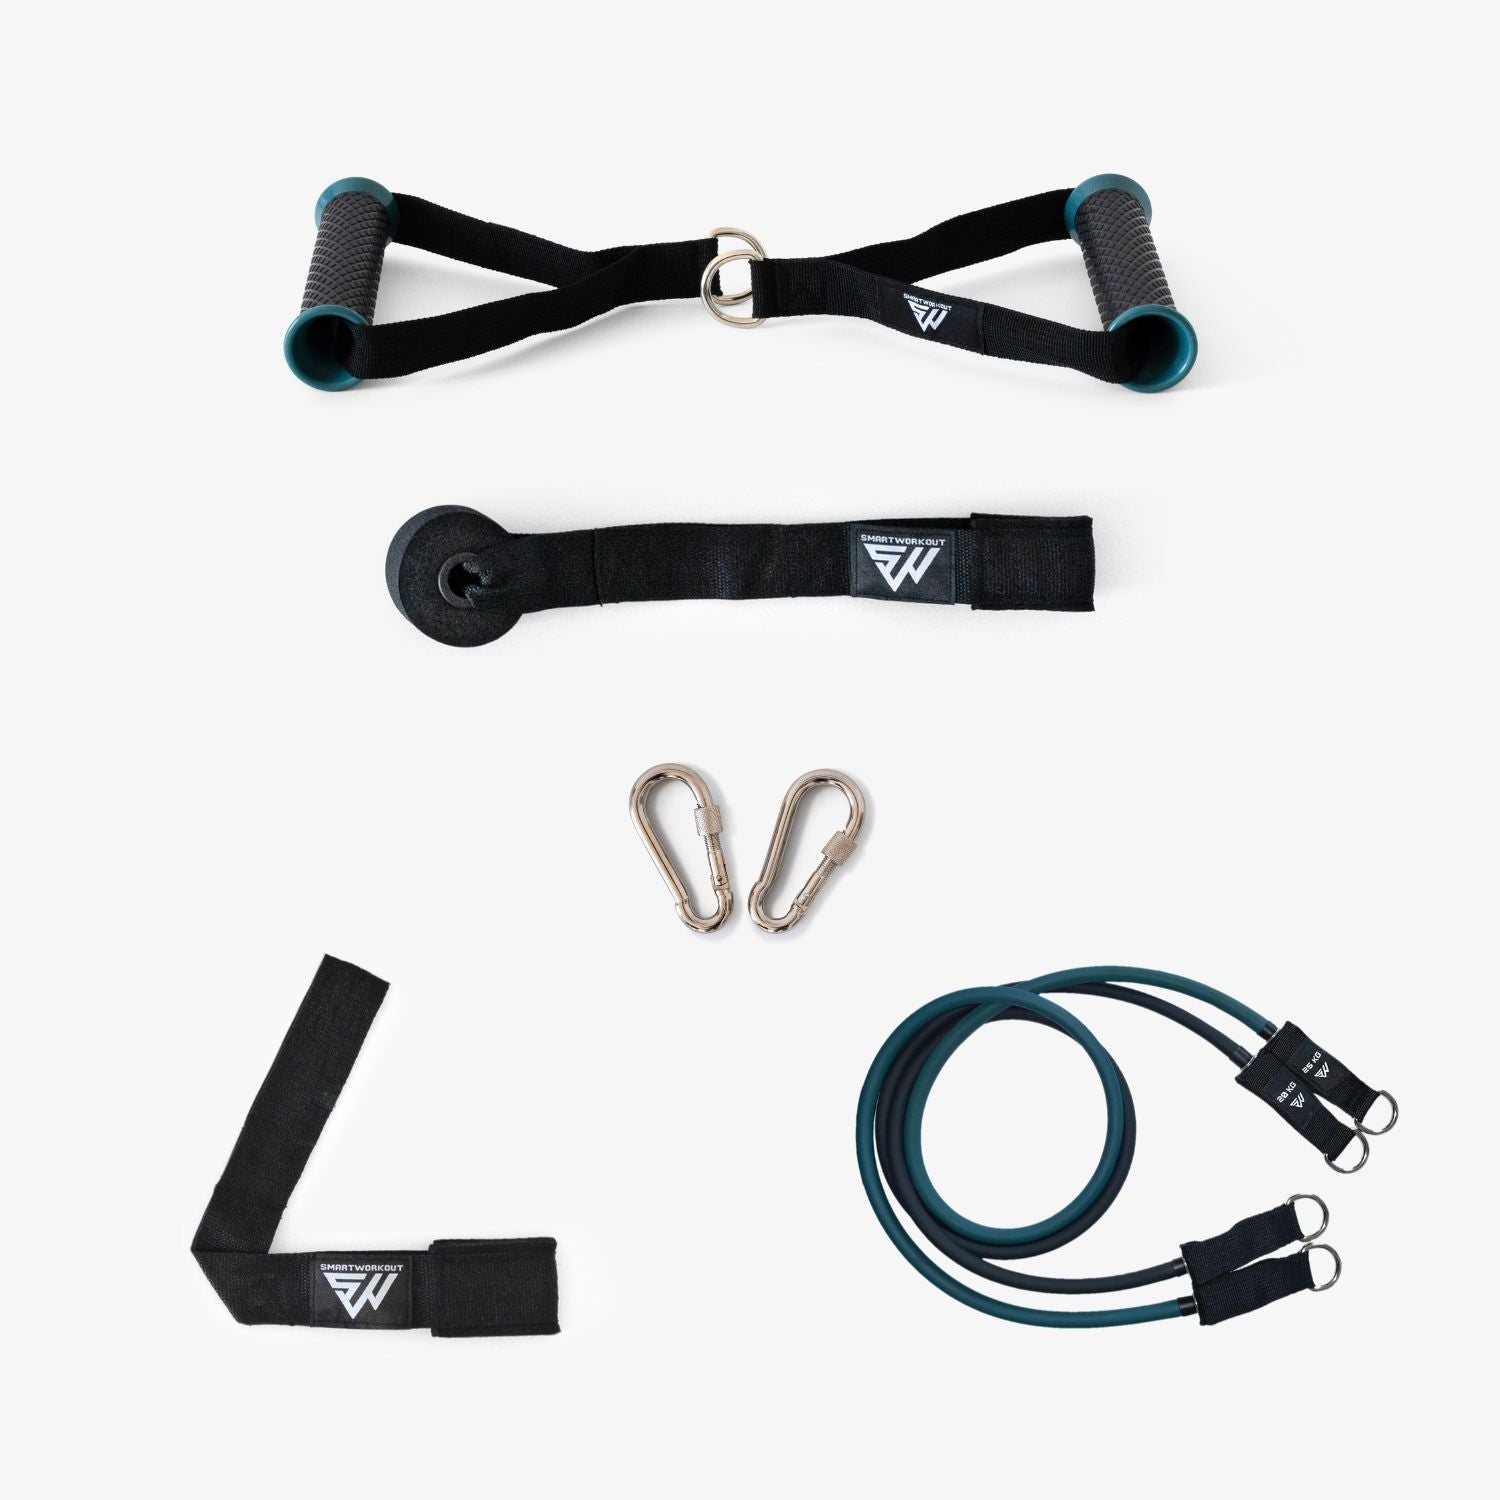 Accessories pack for resistance bands